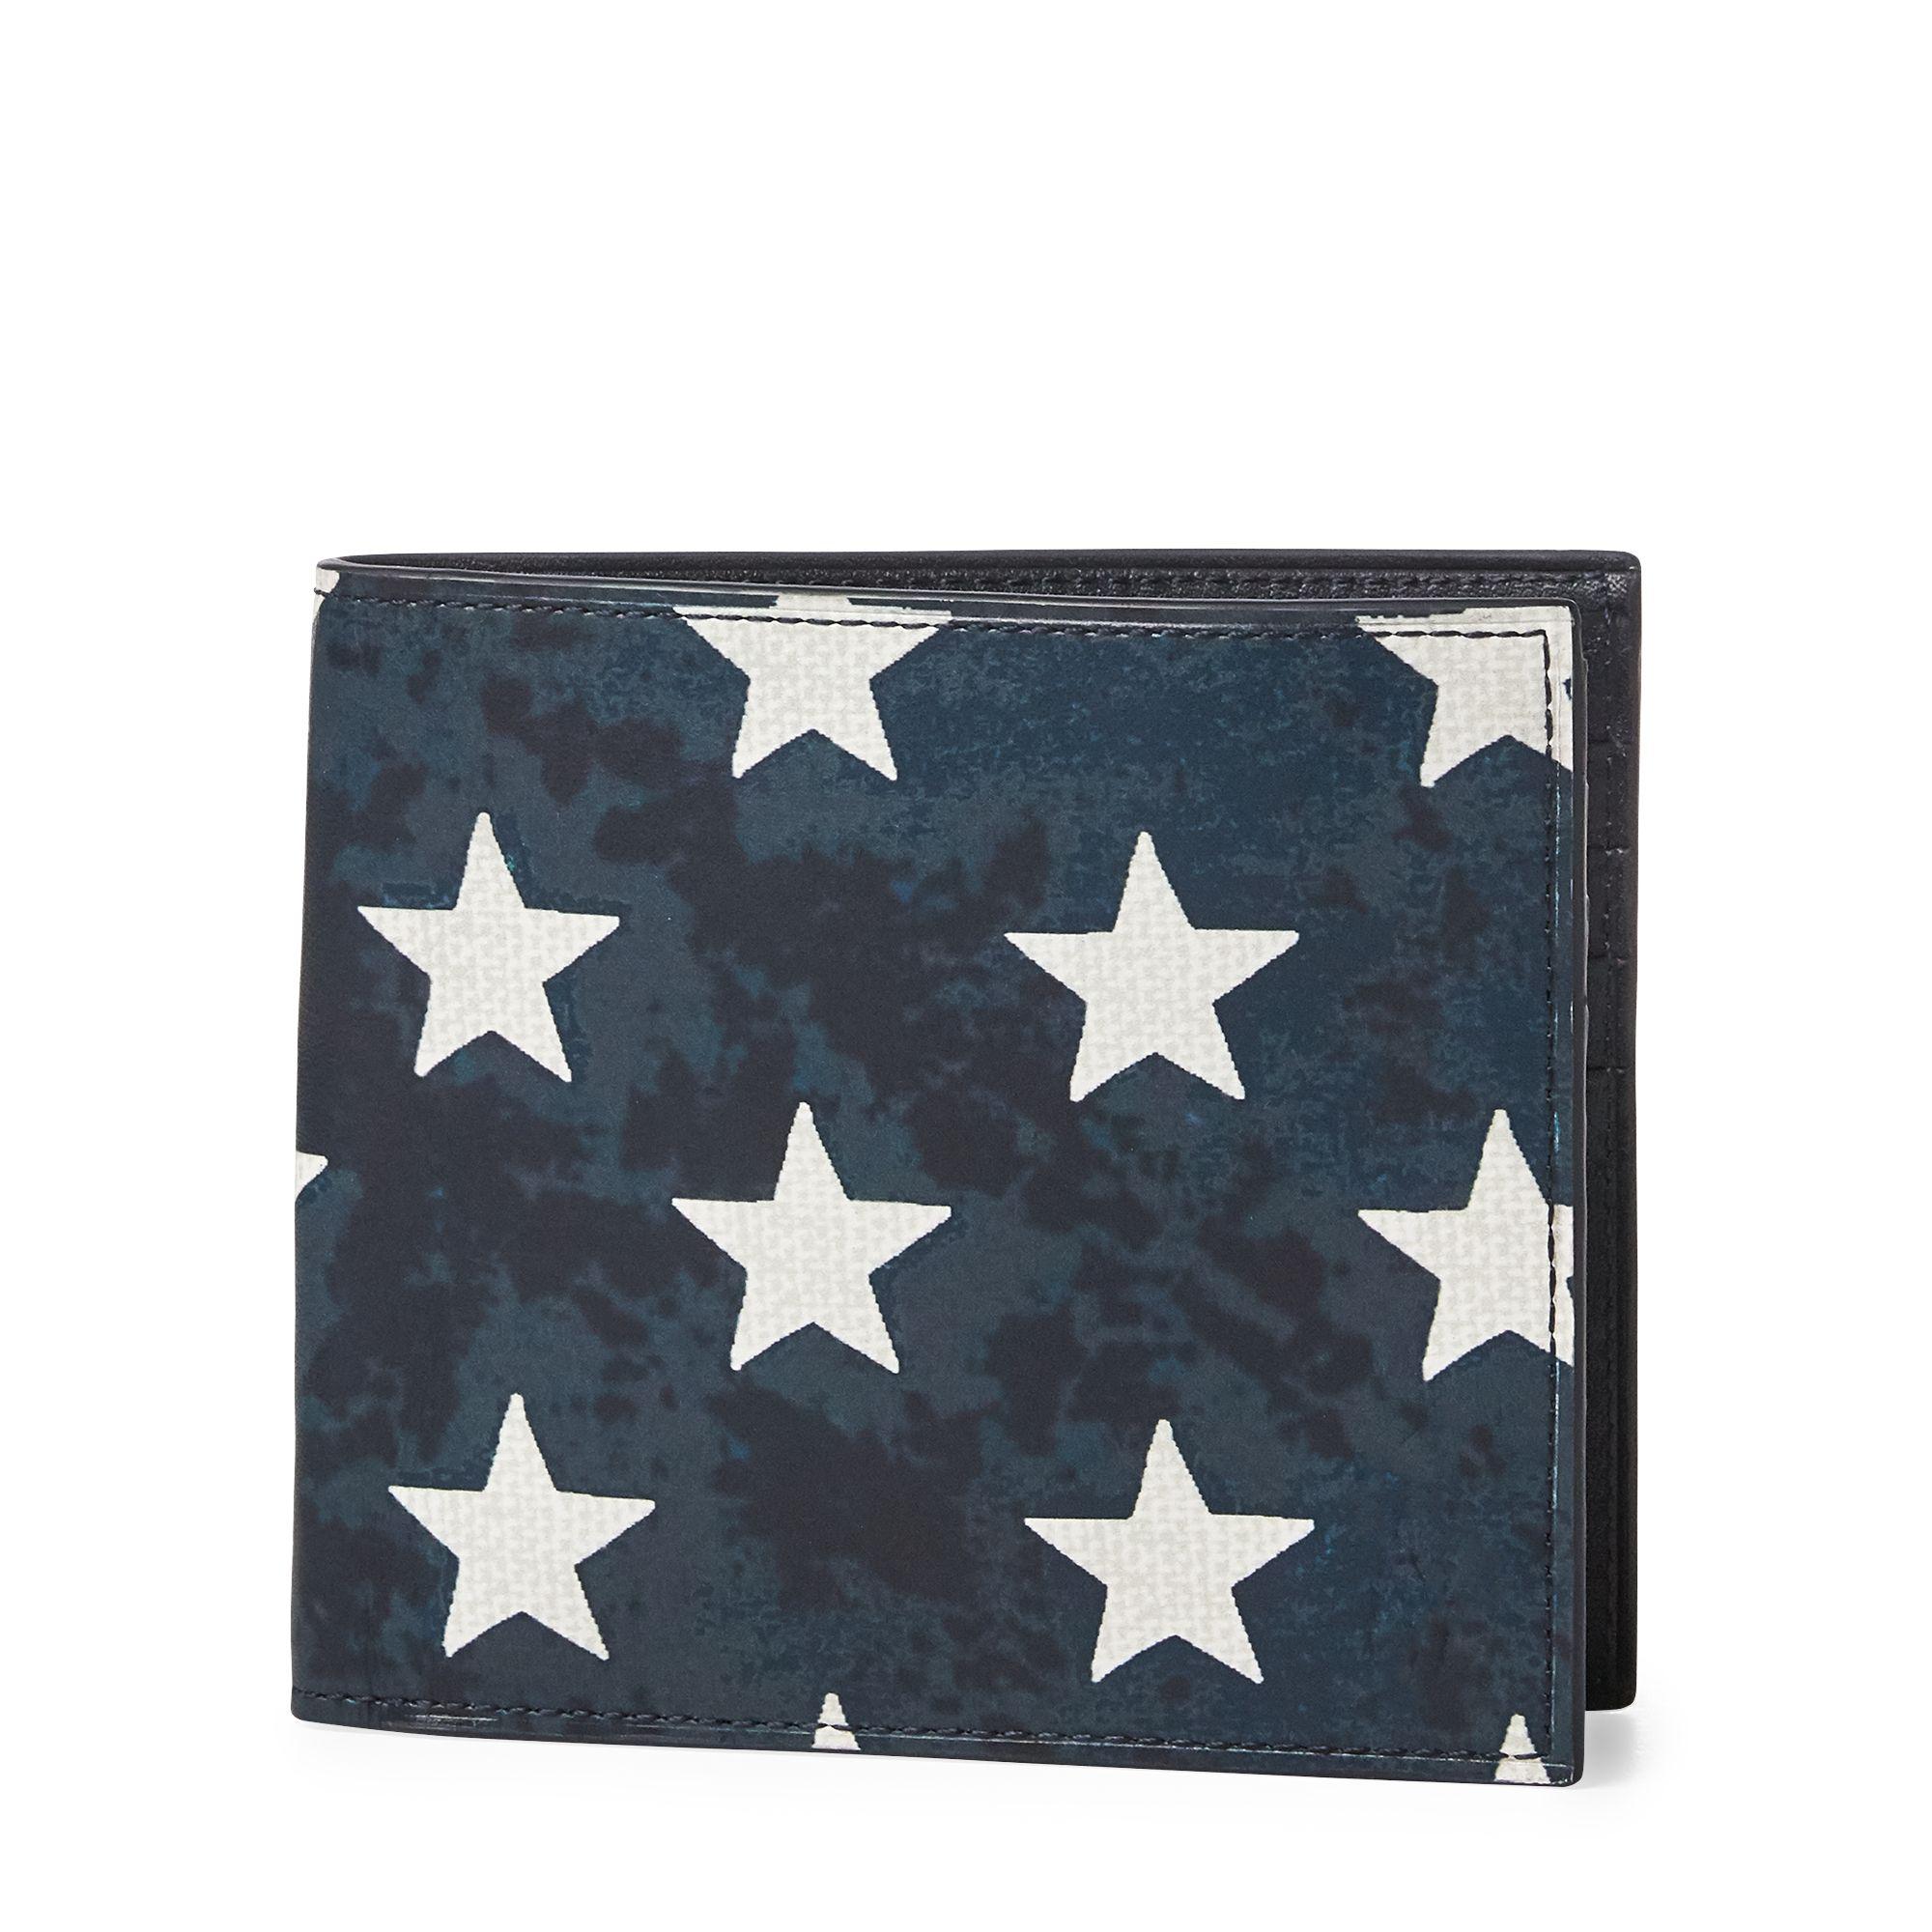 Polo Ralph Lauren Star-spangled Leather Wallet in Navy/White (Blue 